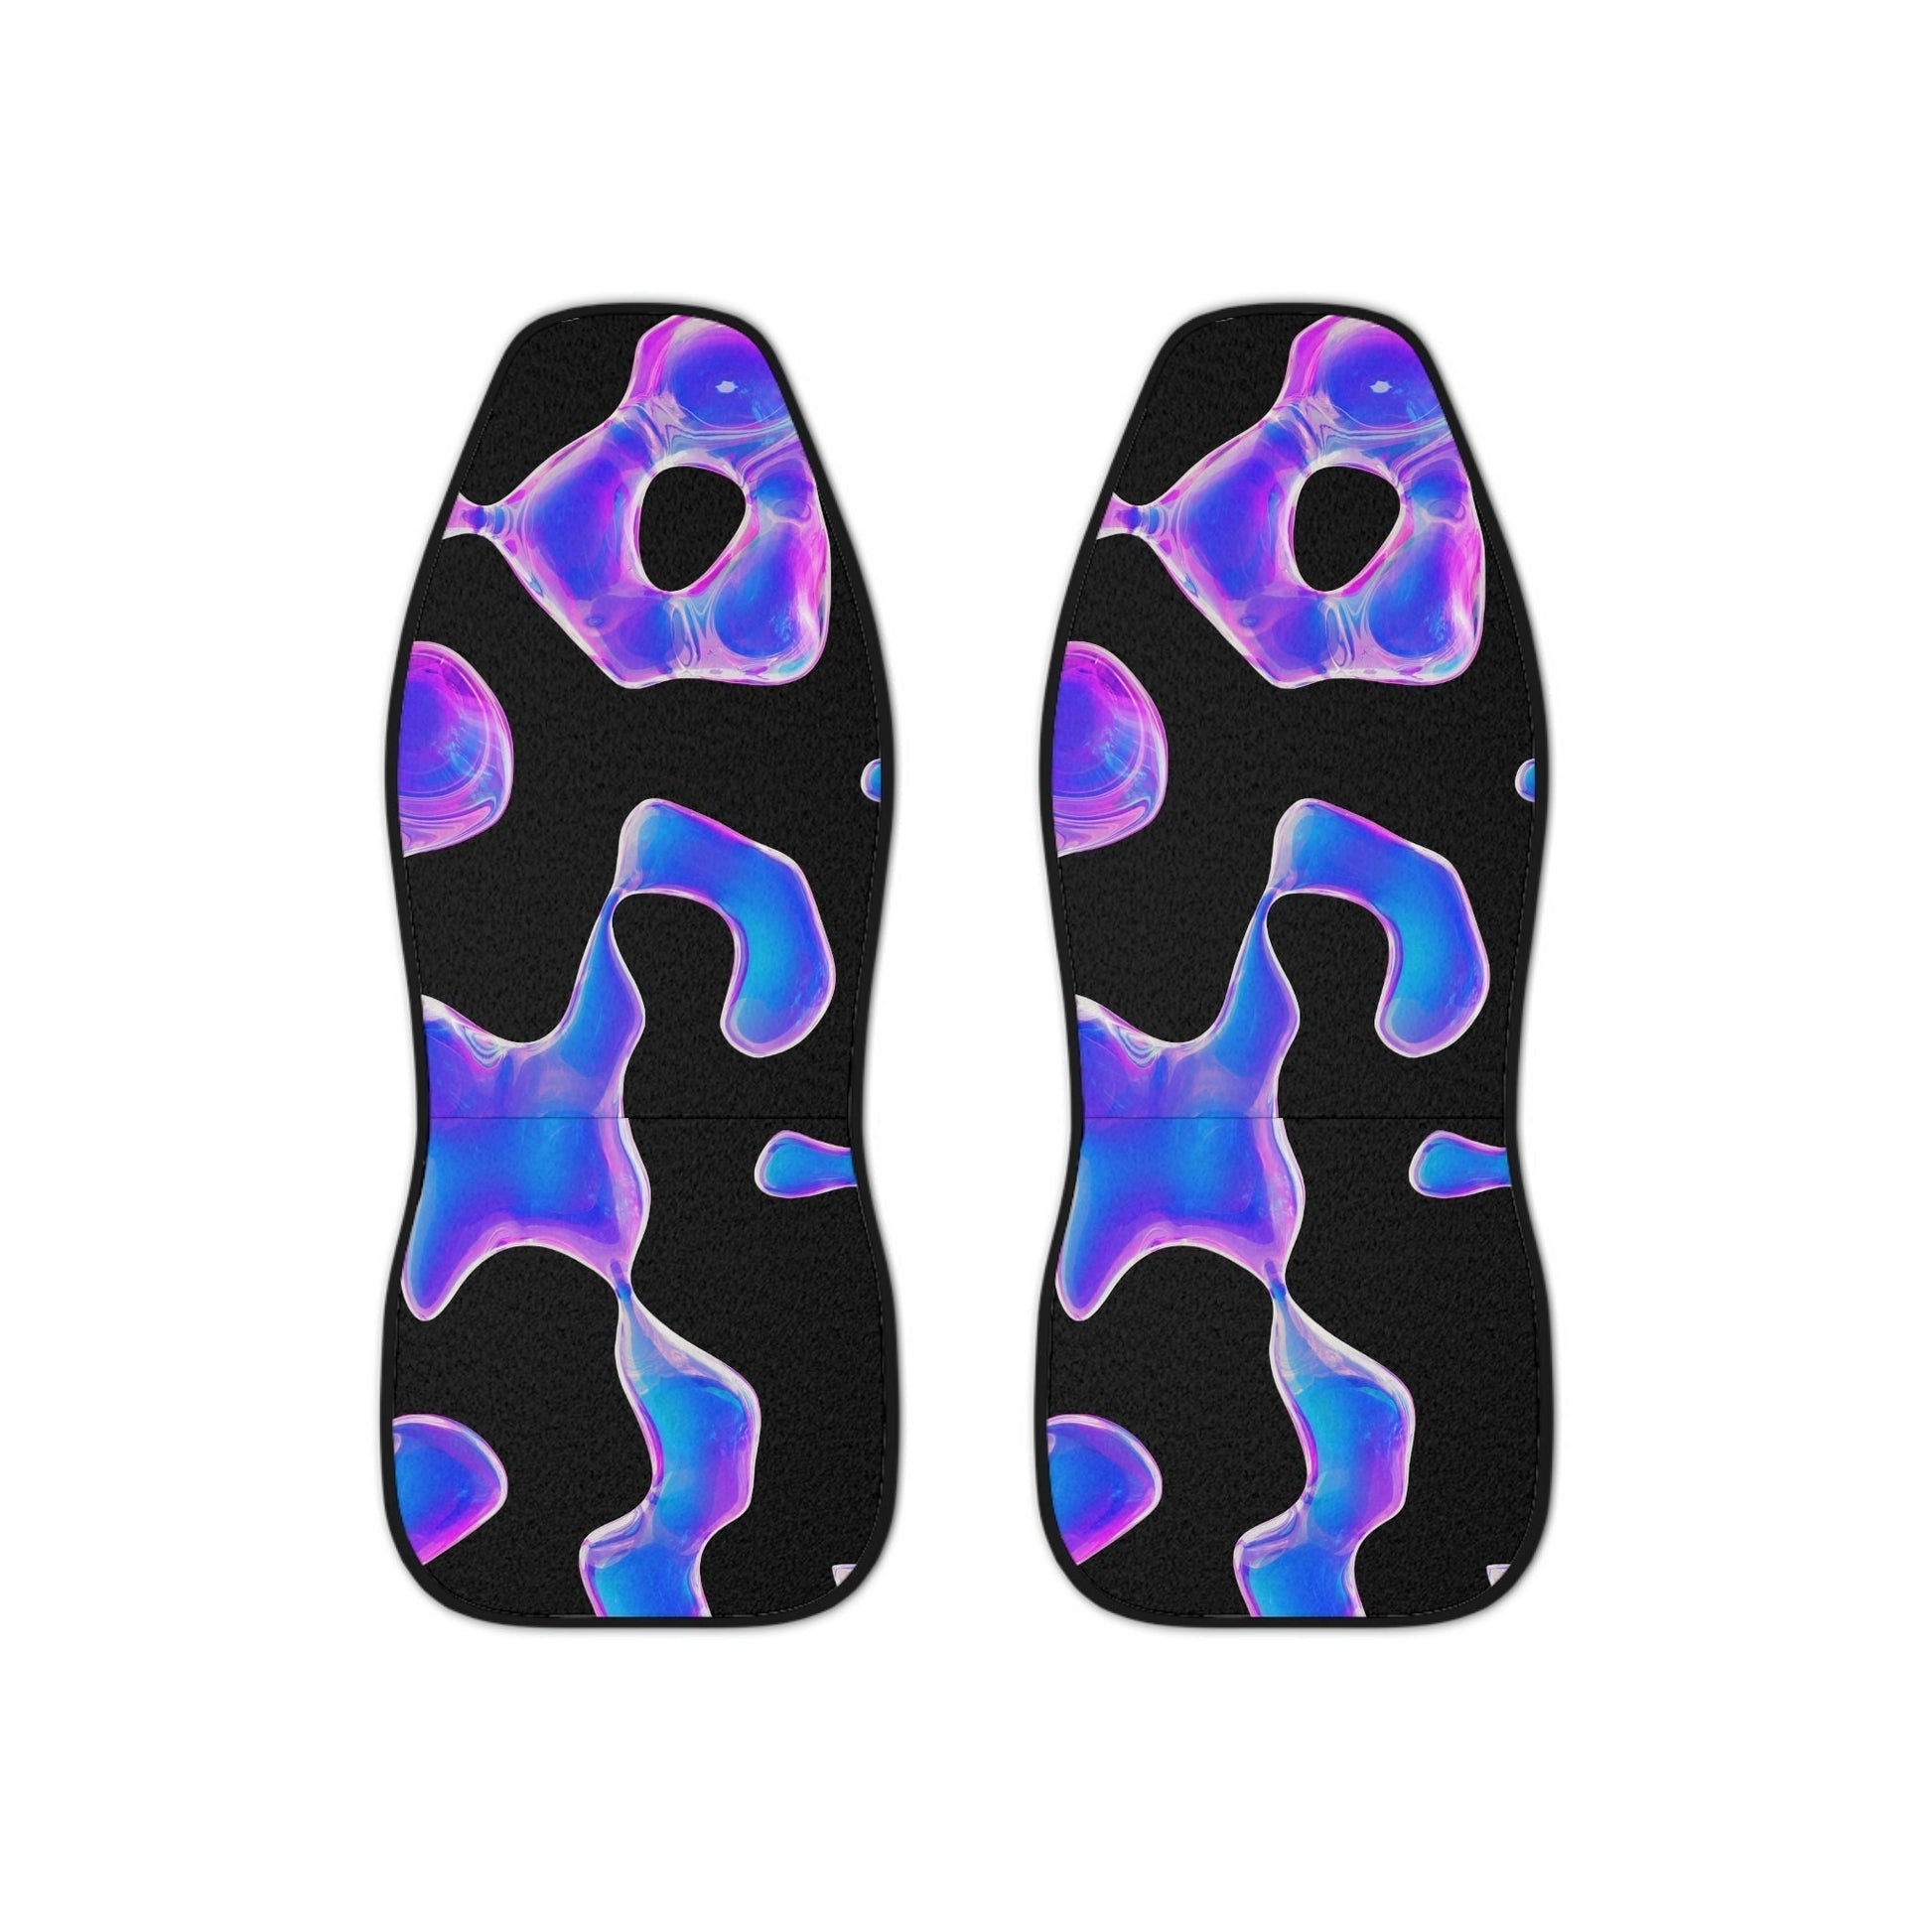 Seat Covers for Cars, Y2K Car Seat Cover, Hippie Car Accessories for Women, Blue and Black Universal Vehicle Seat Protector, Neon Chair Cover for Car